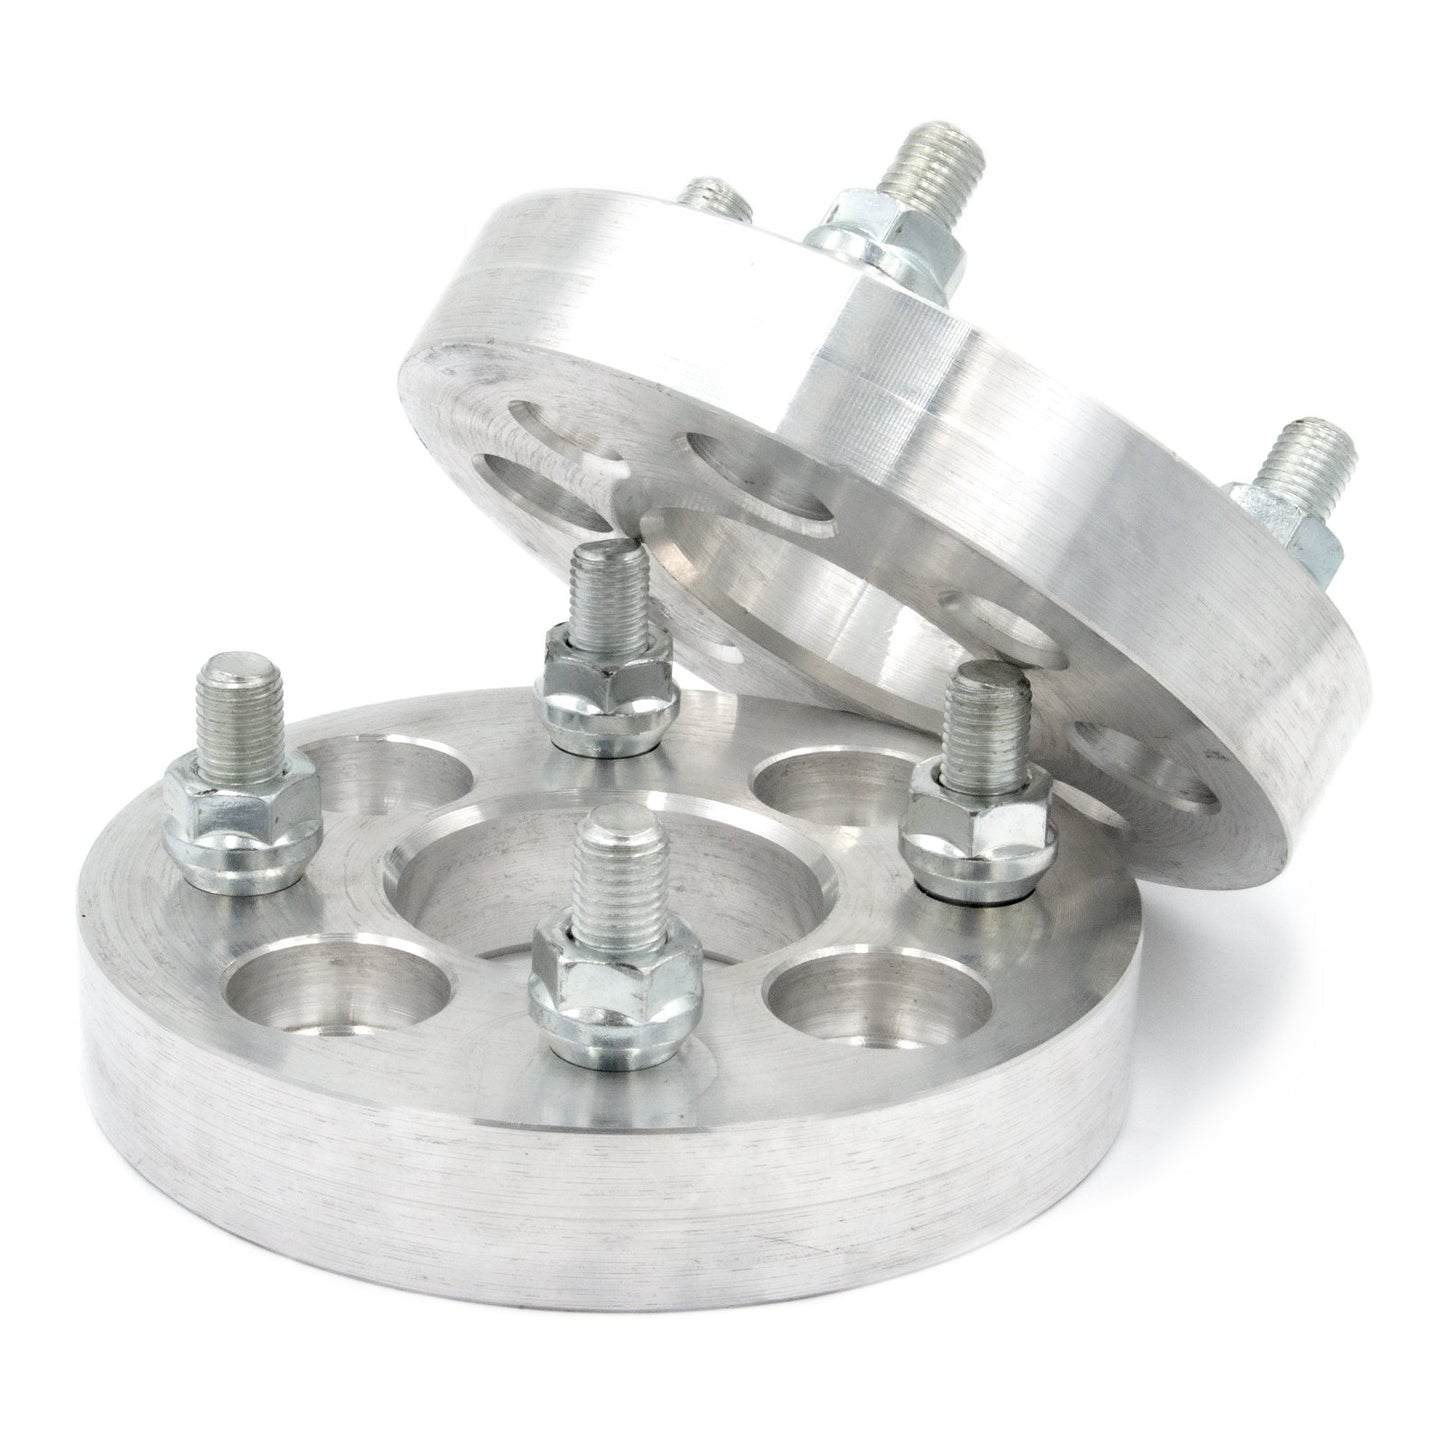 4x115 to 4x130 Wheel Spacer/Adapter - Thickness: 3/4"- 4"